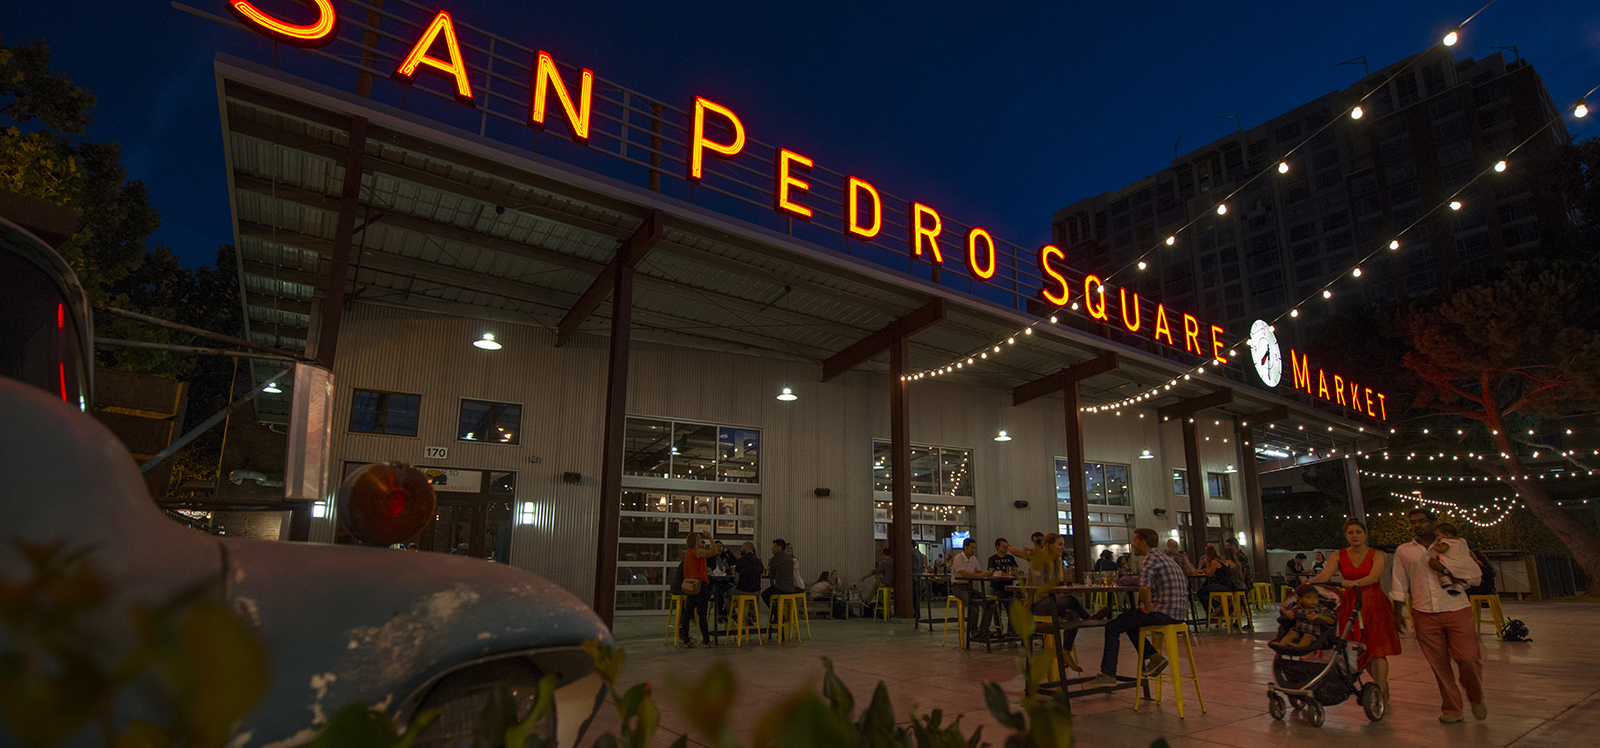 San Pedro Square Market Sign in the evening